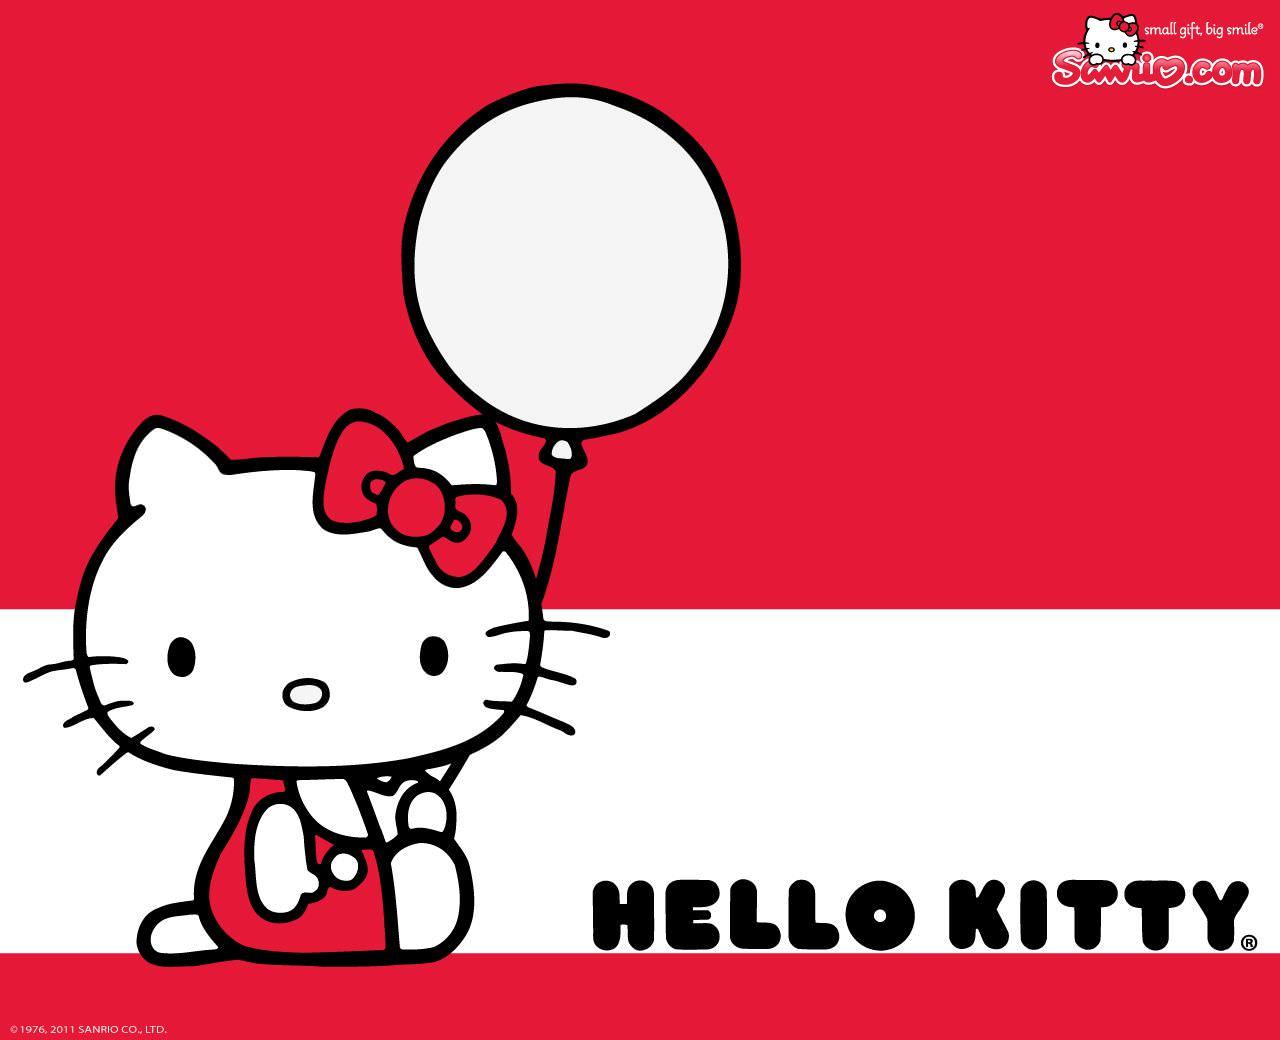 Hello Kitty Red wallpaper in 1024x768 resolution